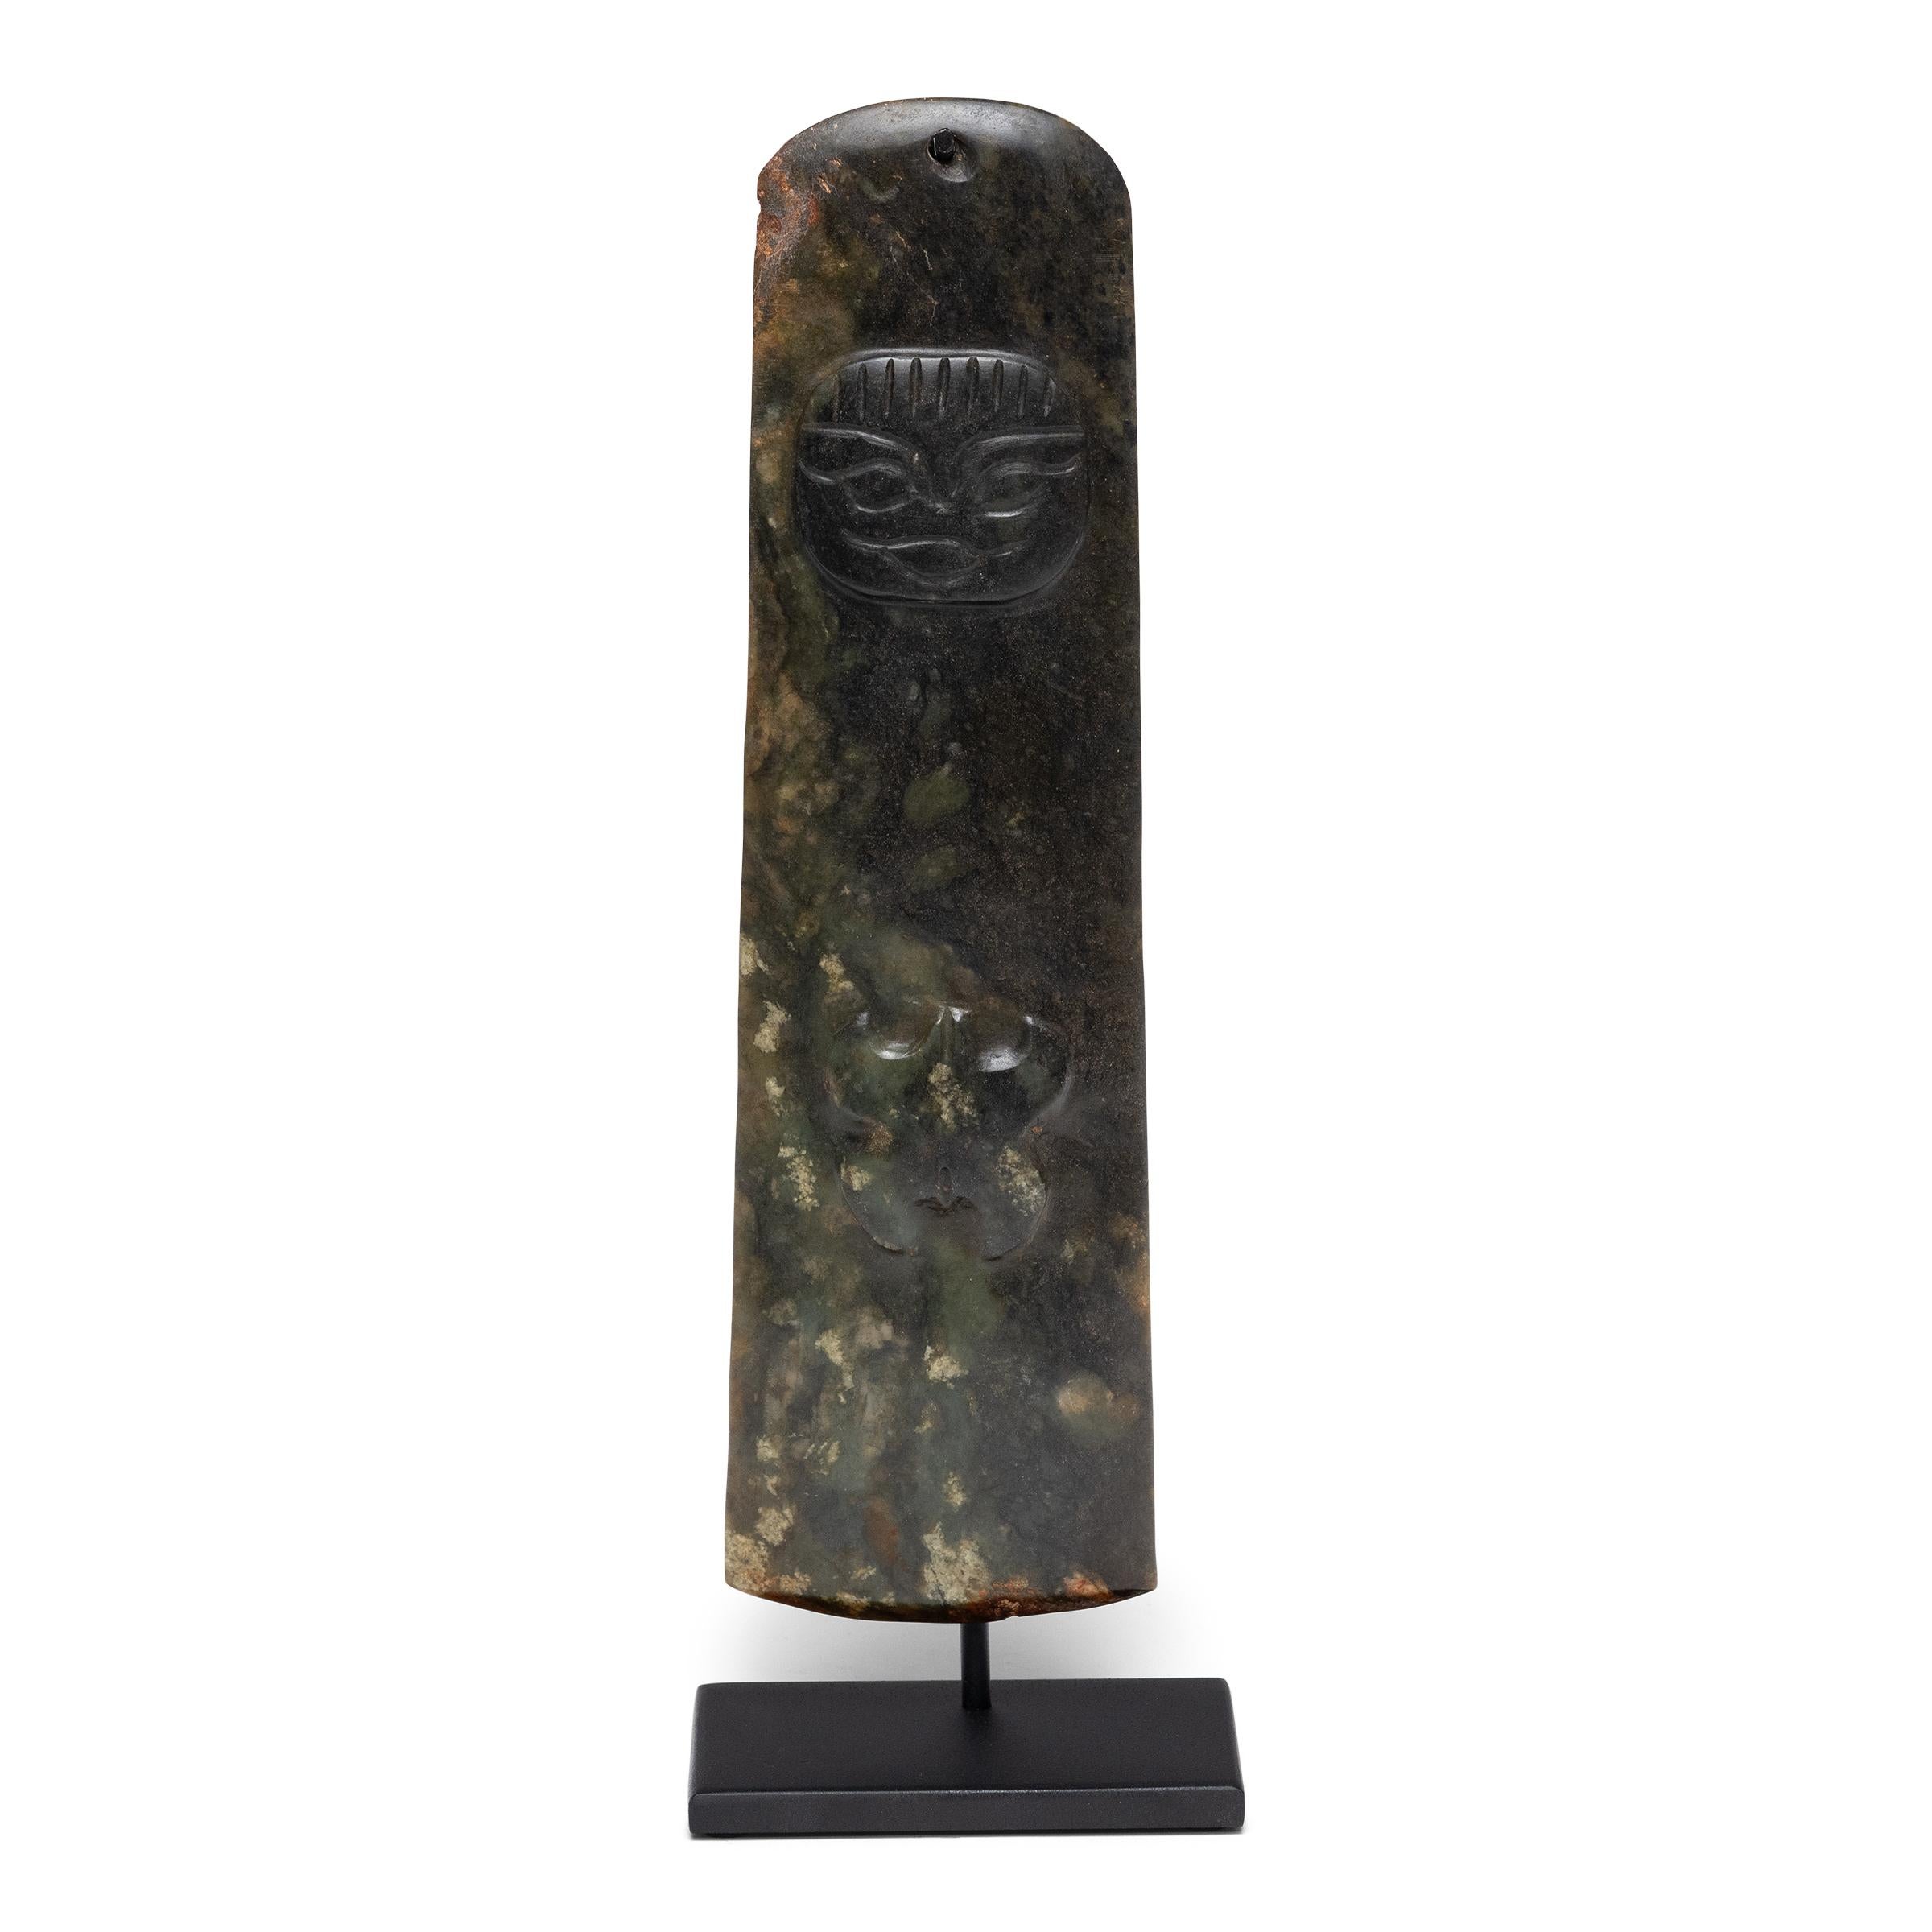 Based on forms that emerged during the Shang Dynasty (1600-1027 BC), this jade stone ceremonial blade continues upon this tradition with precision. The Shang dynasty placed great emphasis on the administration of power through ceremonies that